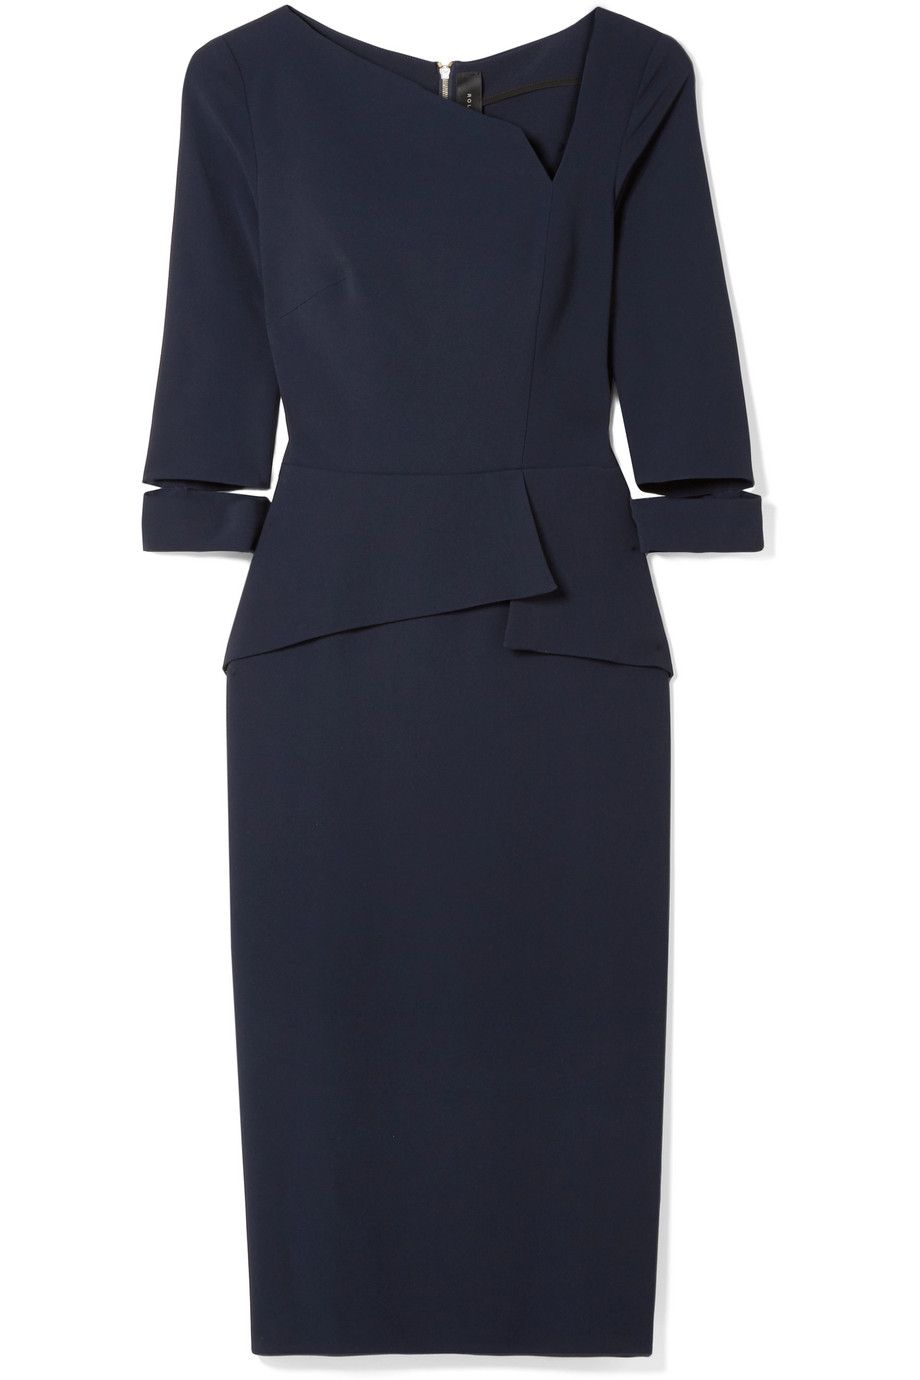 Kate Middleton Attends Festival of Remembrance Wearing a Roland Mouret ...